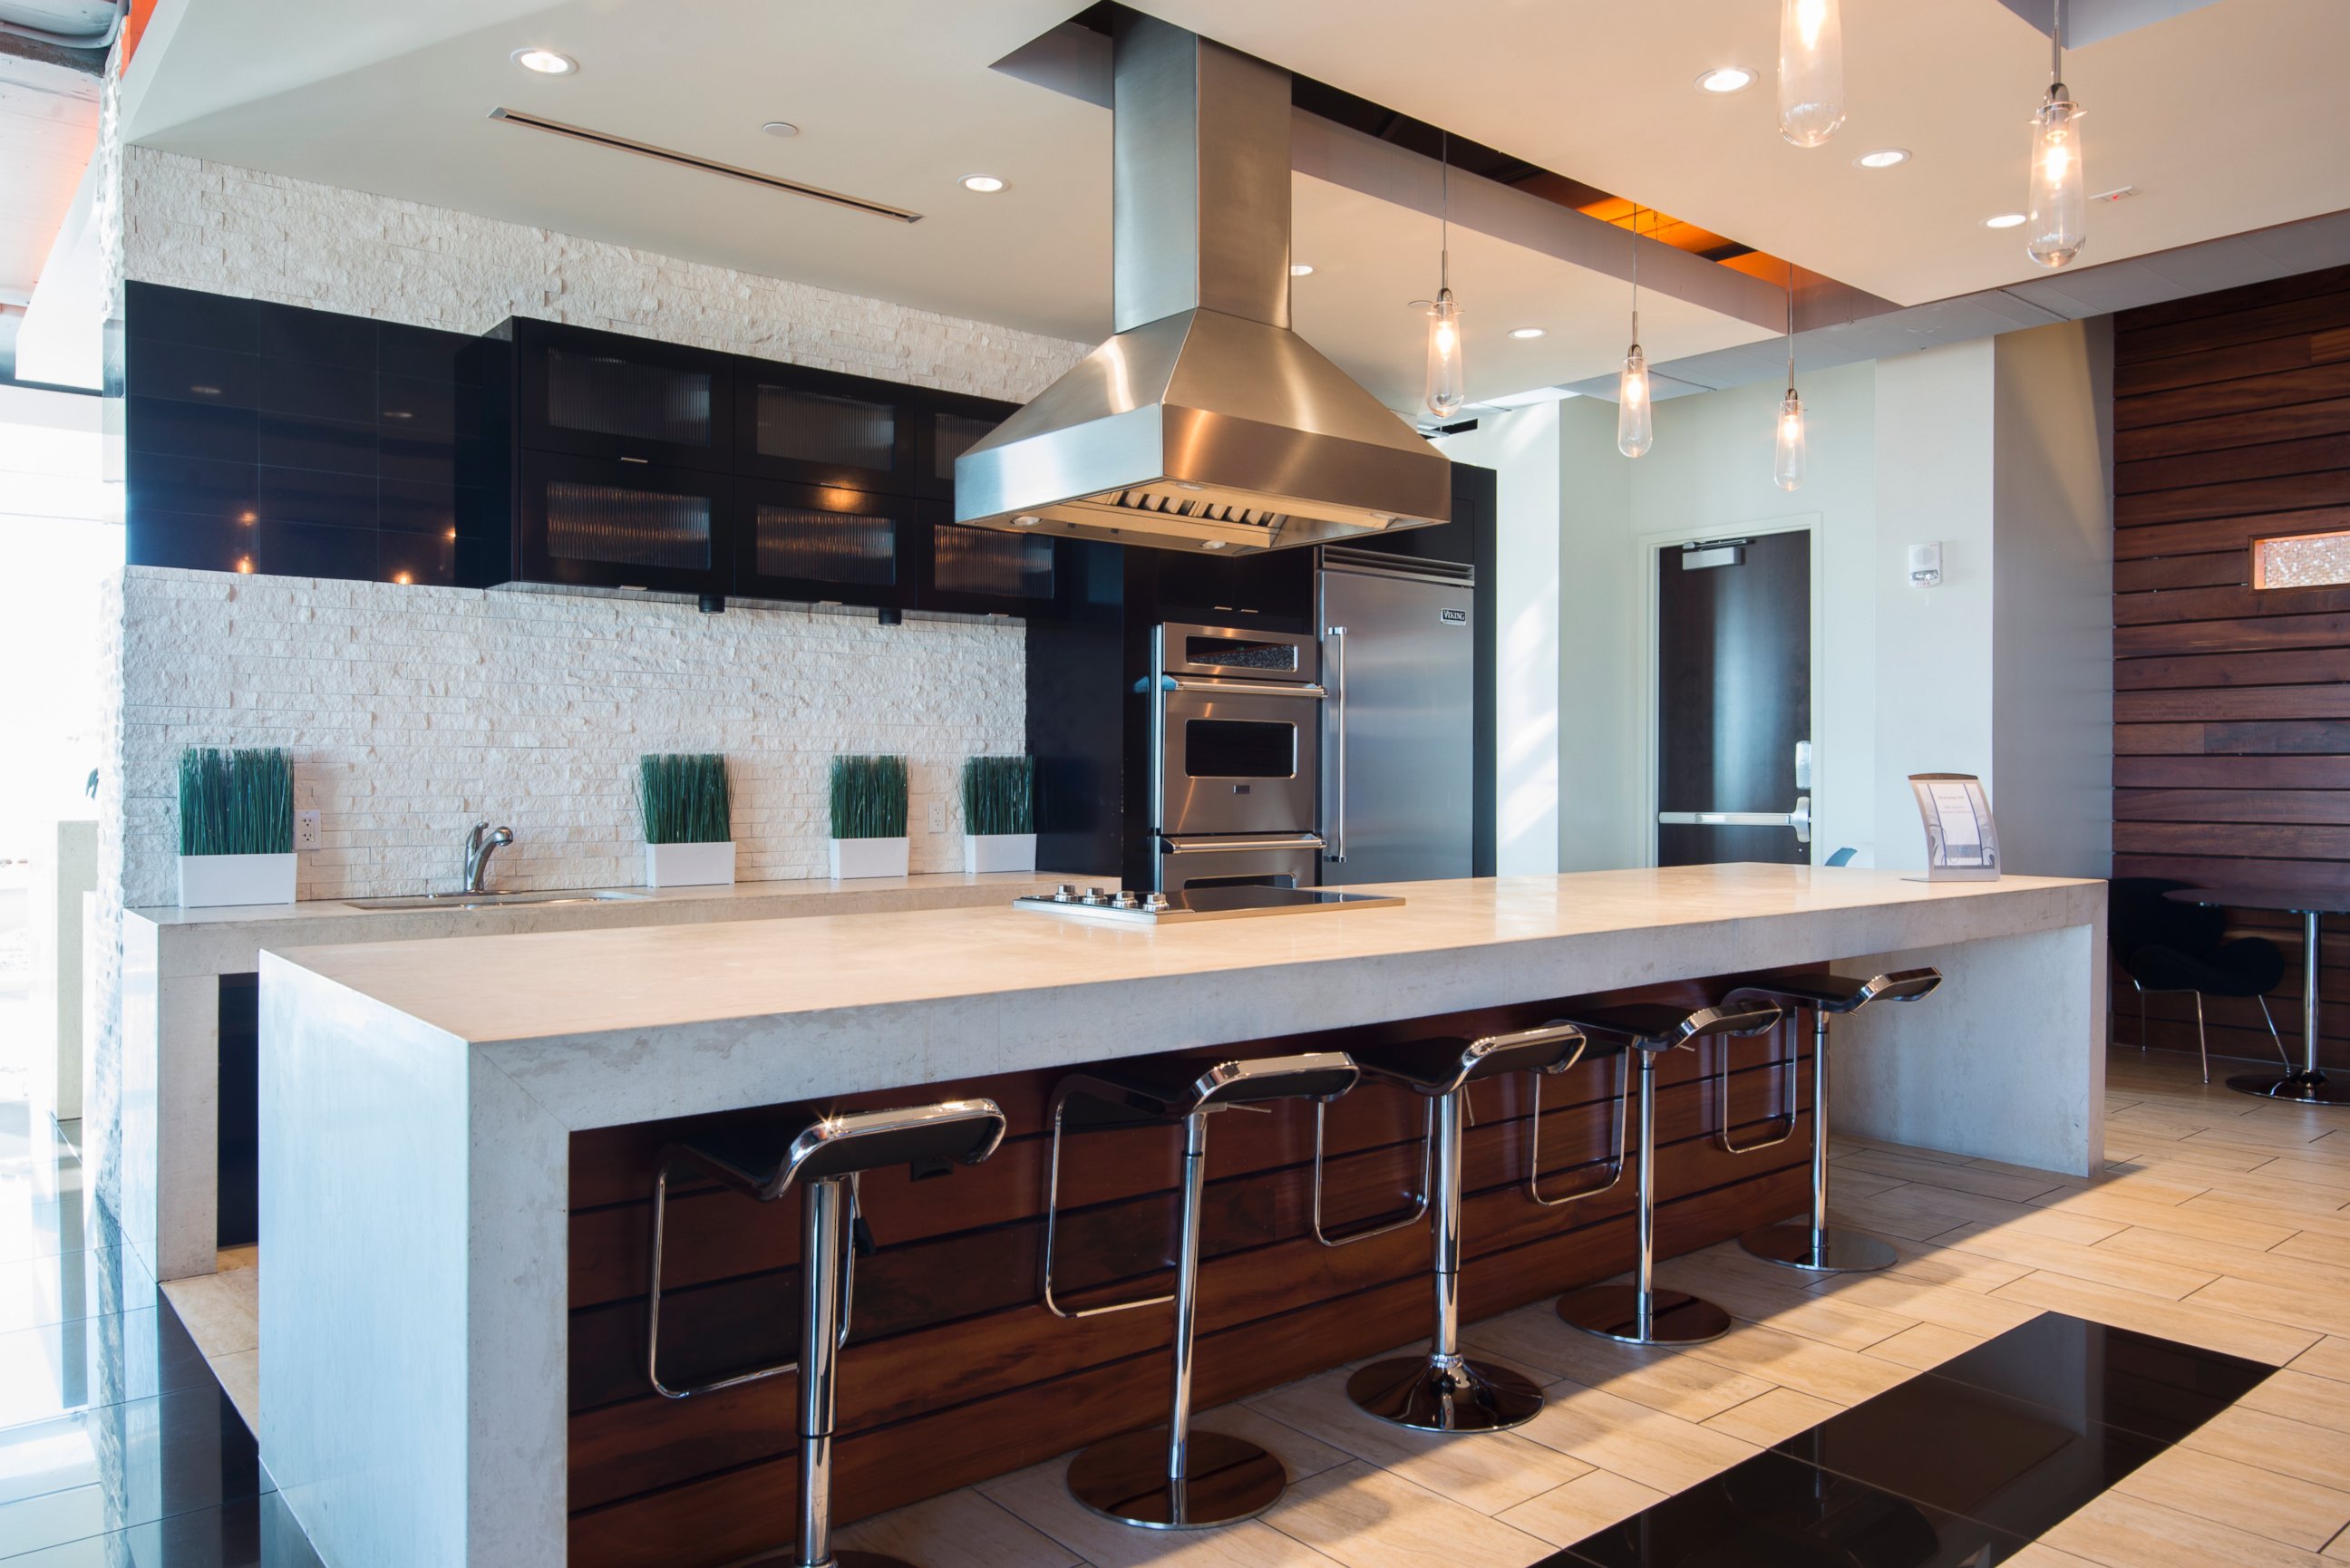 PHOTO: The kitchen in Roman Harper's Charlotte home, available for Super Bowl 50 on Airbnb.